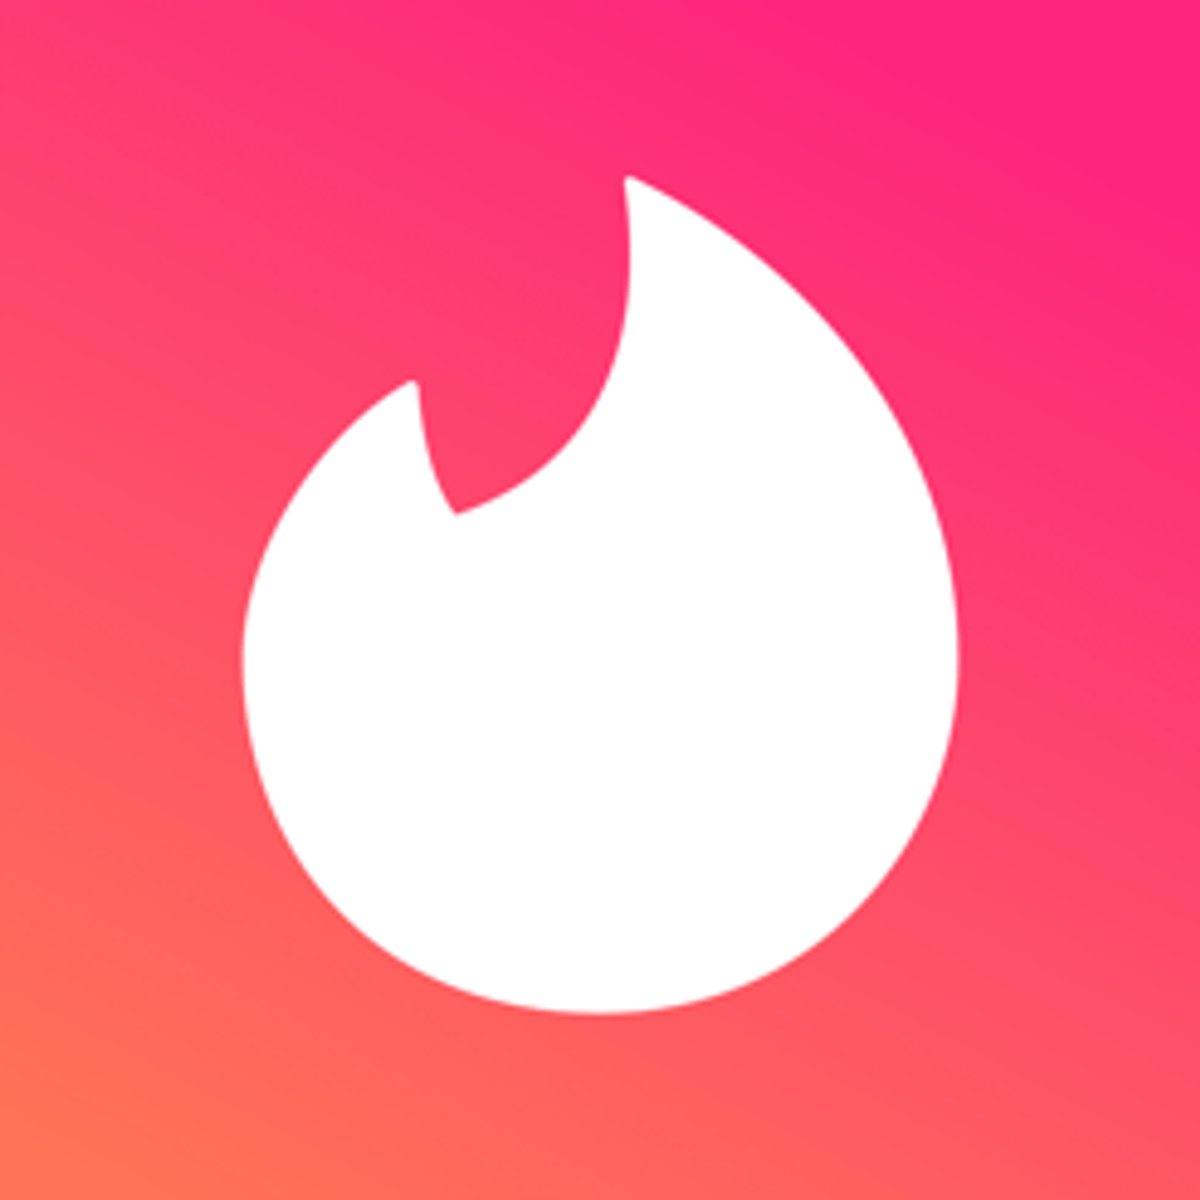 Pta Bans Tinder And Five Other Dating Apps Citing Immoral Content Global Village Space